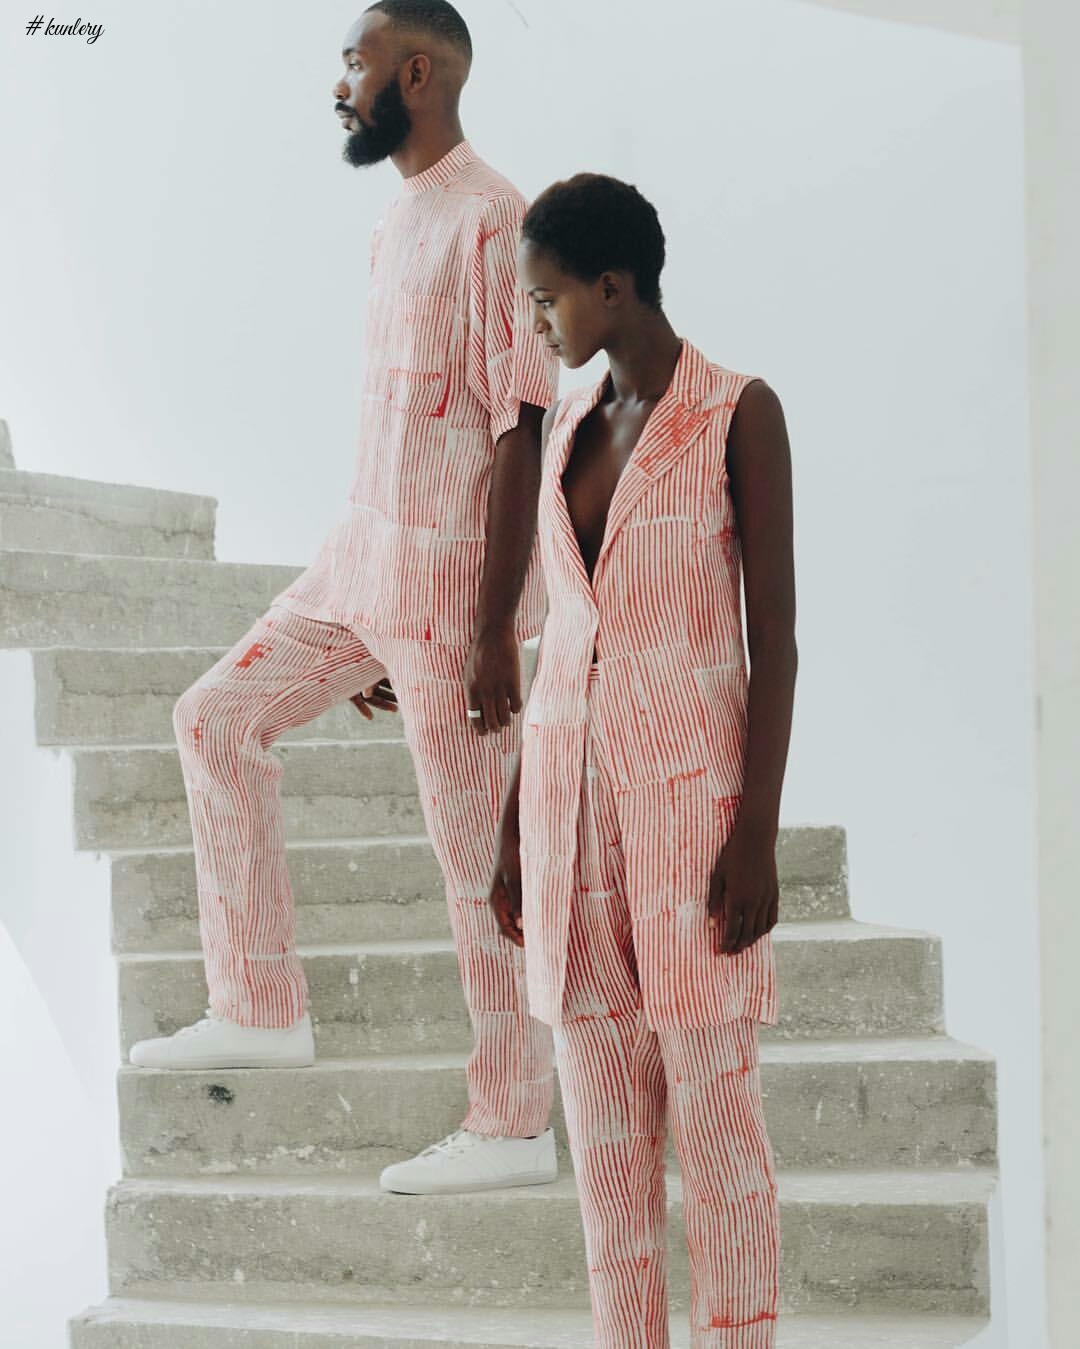 Ré (formerly Ré Bahia) Debuts A New Collection For S/S17 Titled Crazy Print Story